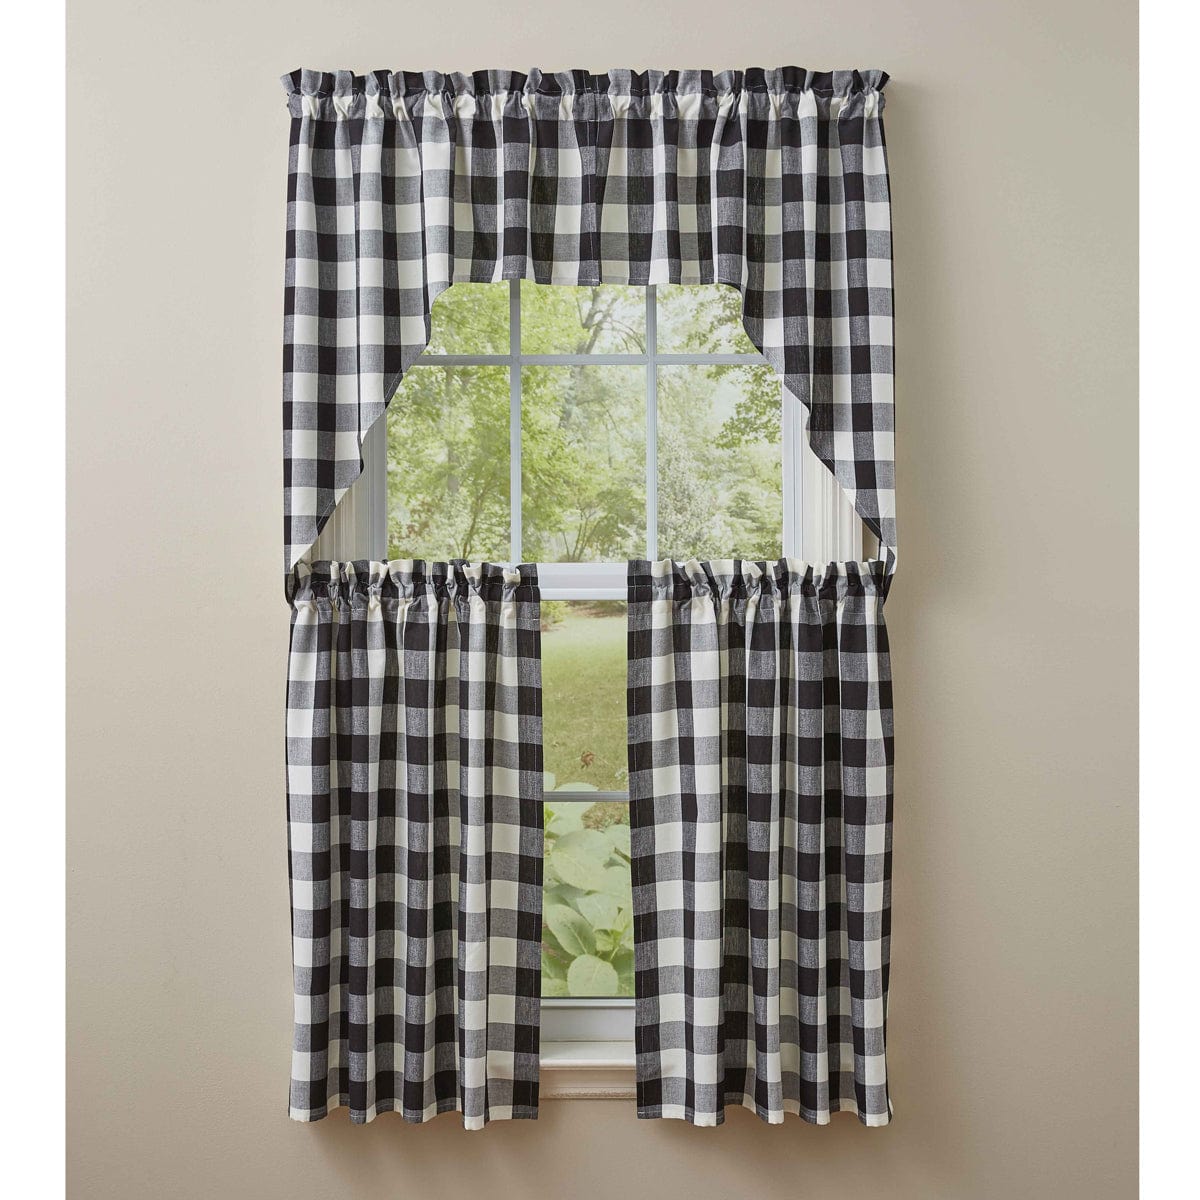 Wicklow Check in Black & Cream Swag Pair 36" Long Unlined-Park Designs-The Village Merchant